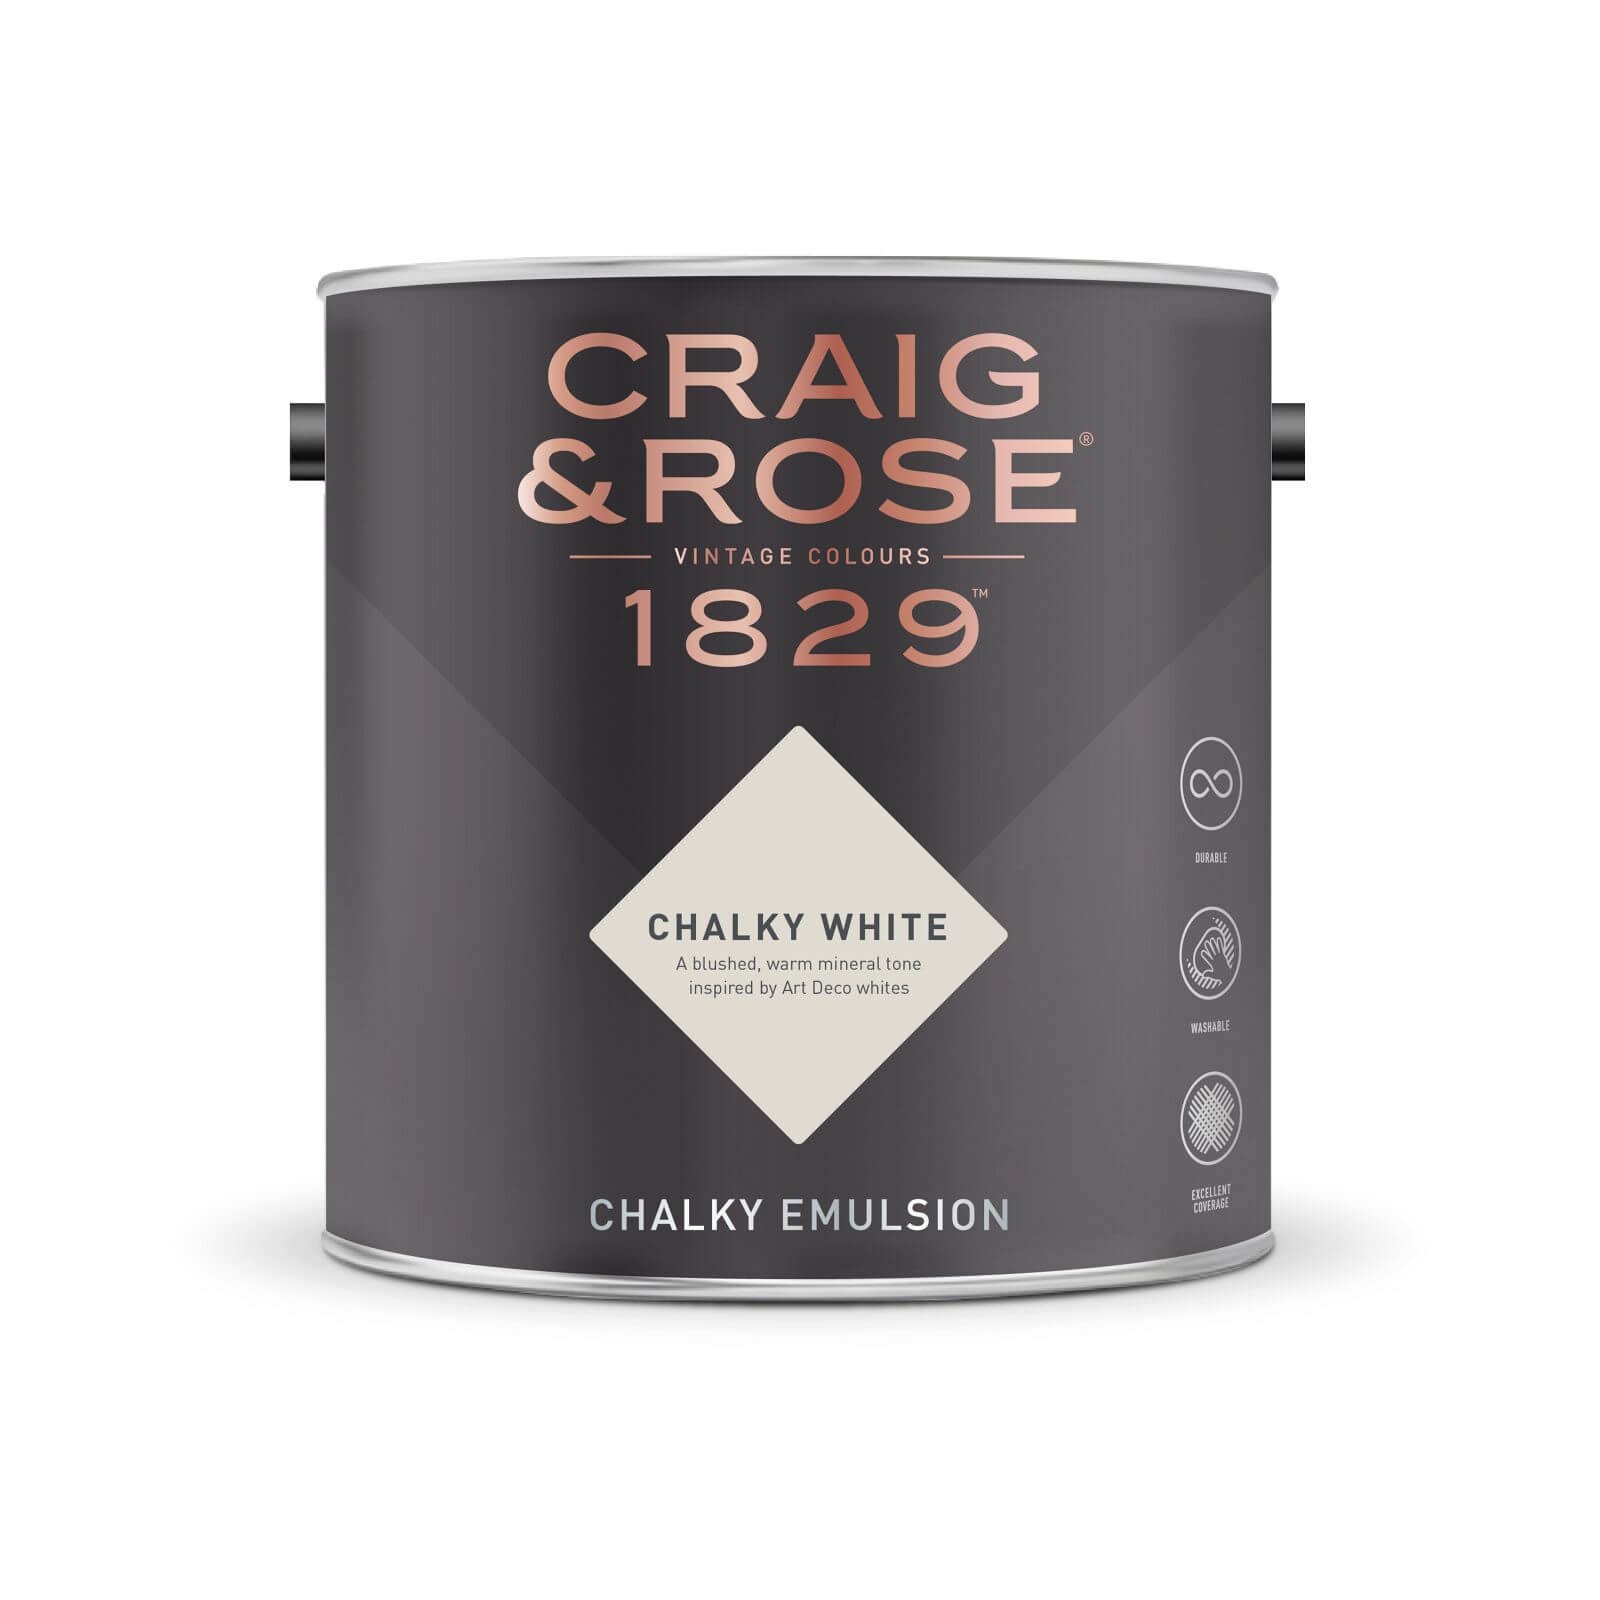 Craig & Rose 1829 Chalky Emulsion Paint Chalky White - 2.5L